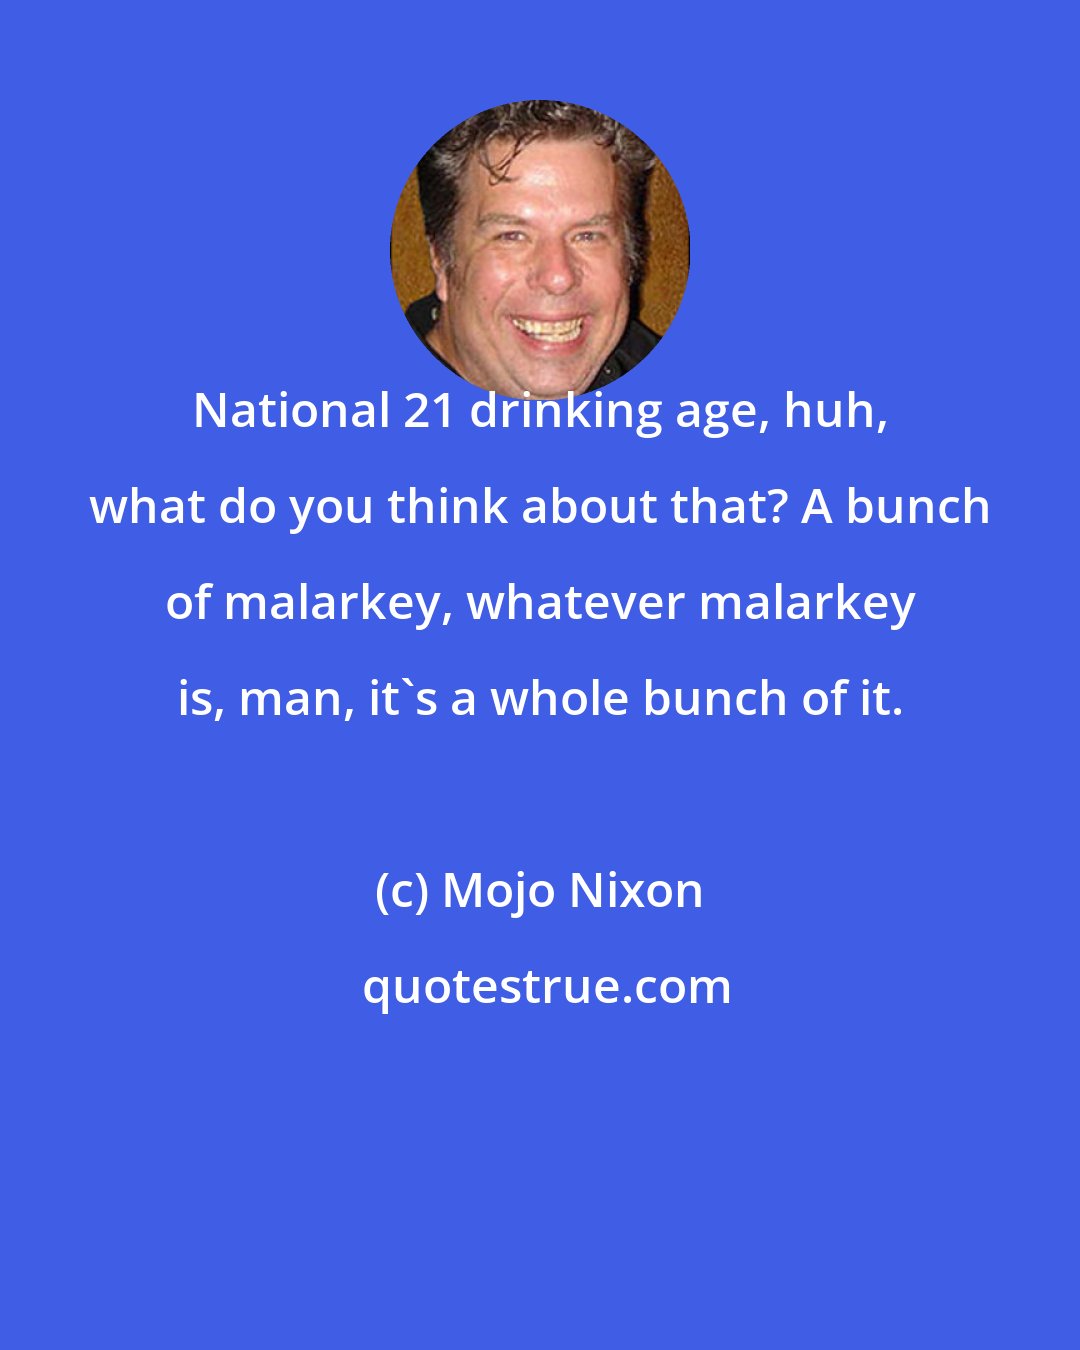 Mojo Nixon: National 21 drinking age, huh, what do you think about that? A bunch of malarkey, whatever malarkey is, man, it's a whole bunch of it.